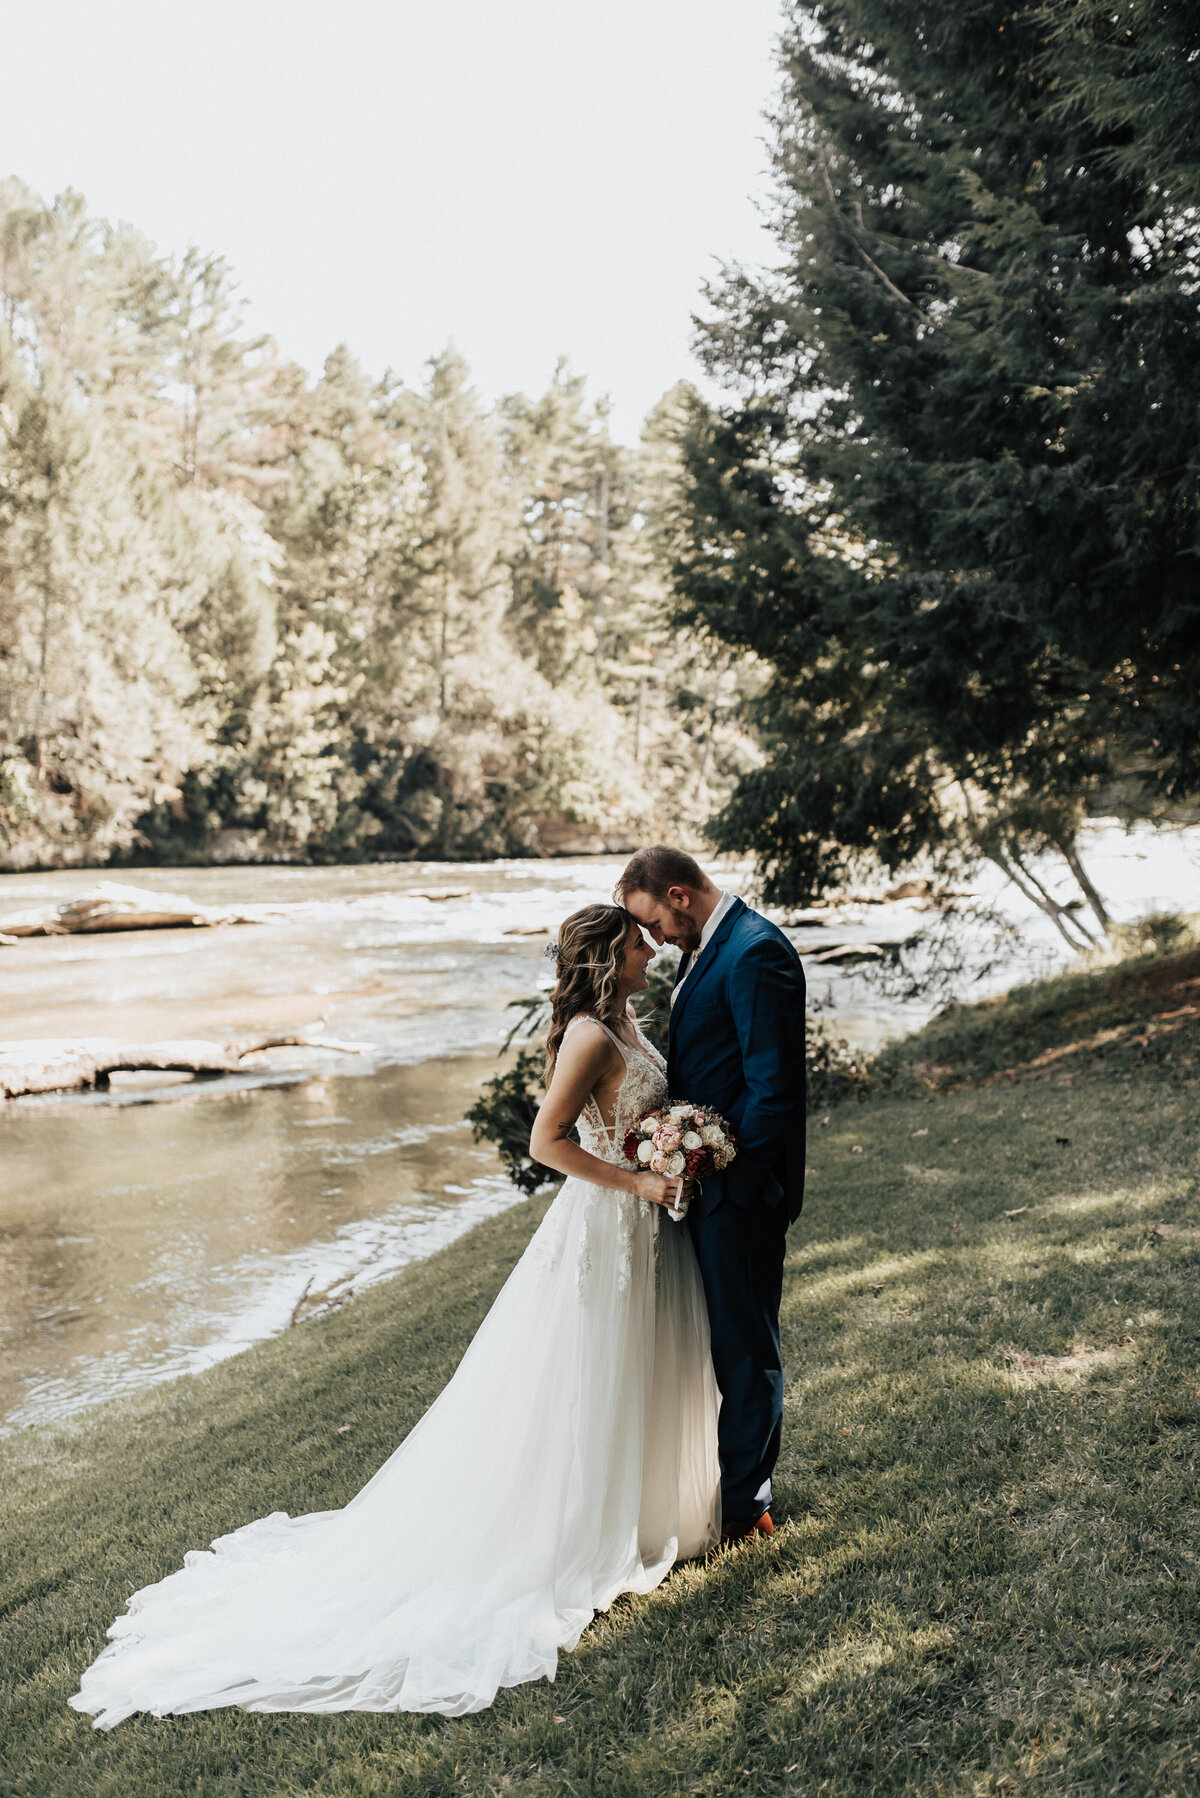 couple-embracing-as-they-pose-wedding-portrait-by-the-river-logan-simmons-Photography